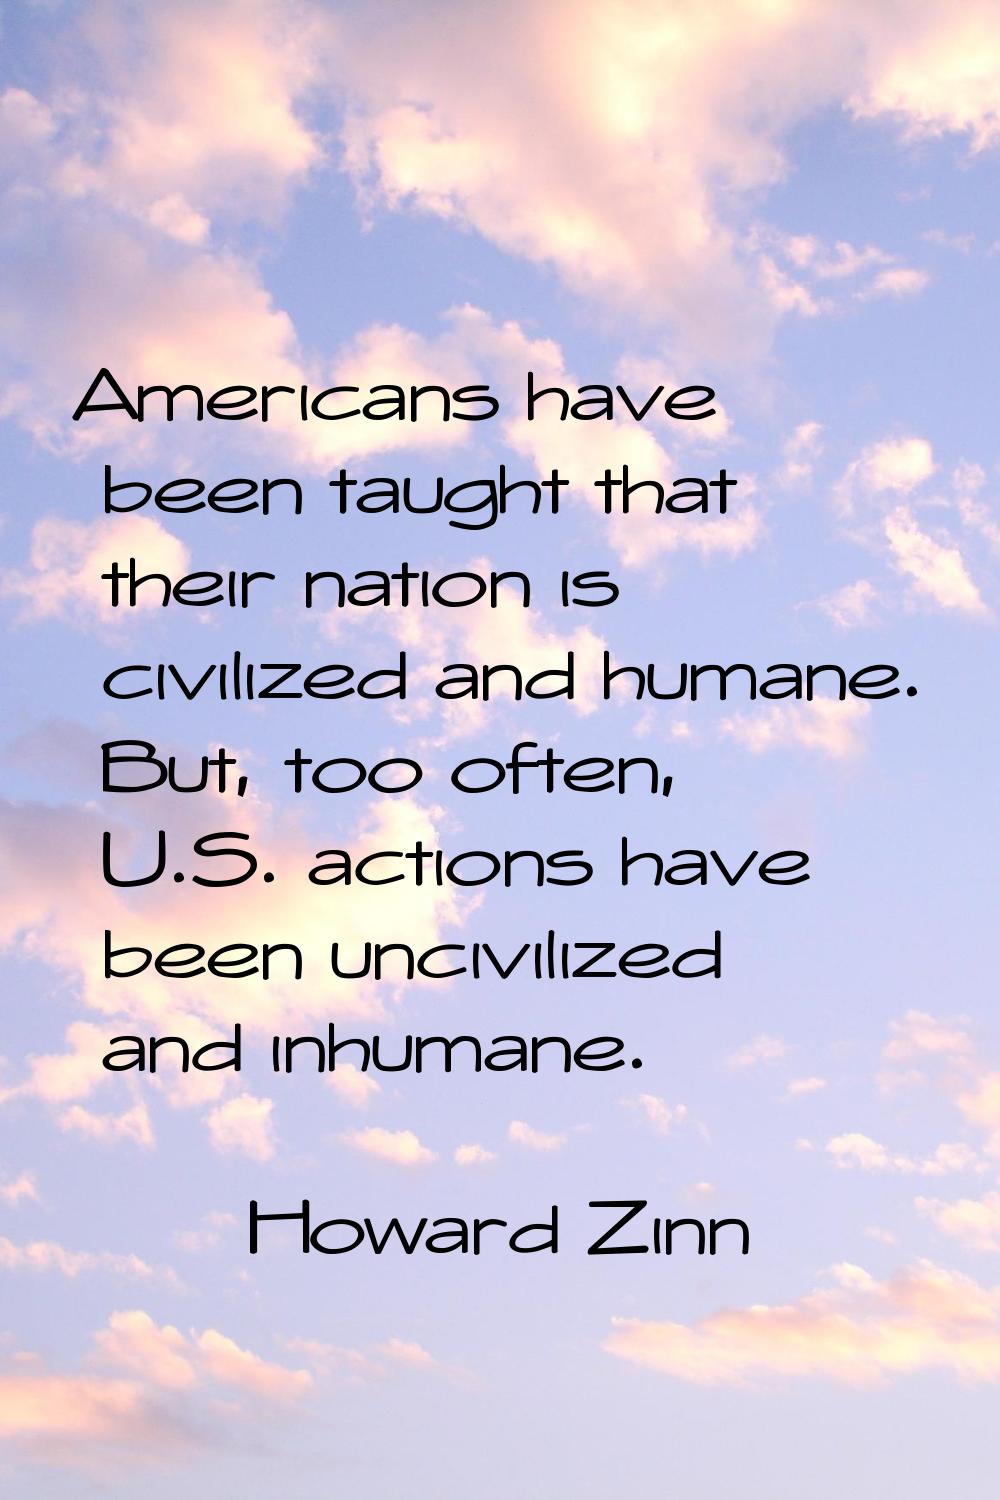 Americans have been taught that their nation is civilized and humane. But, too often, U.S. actions 